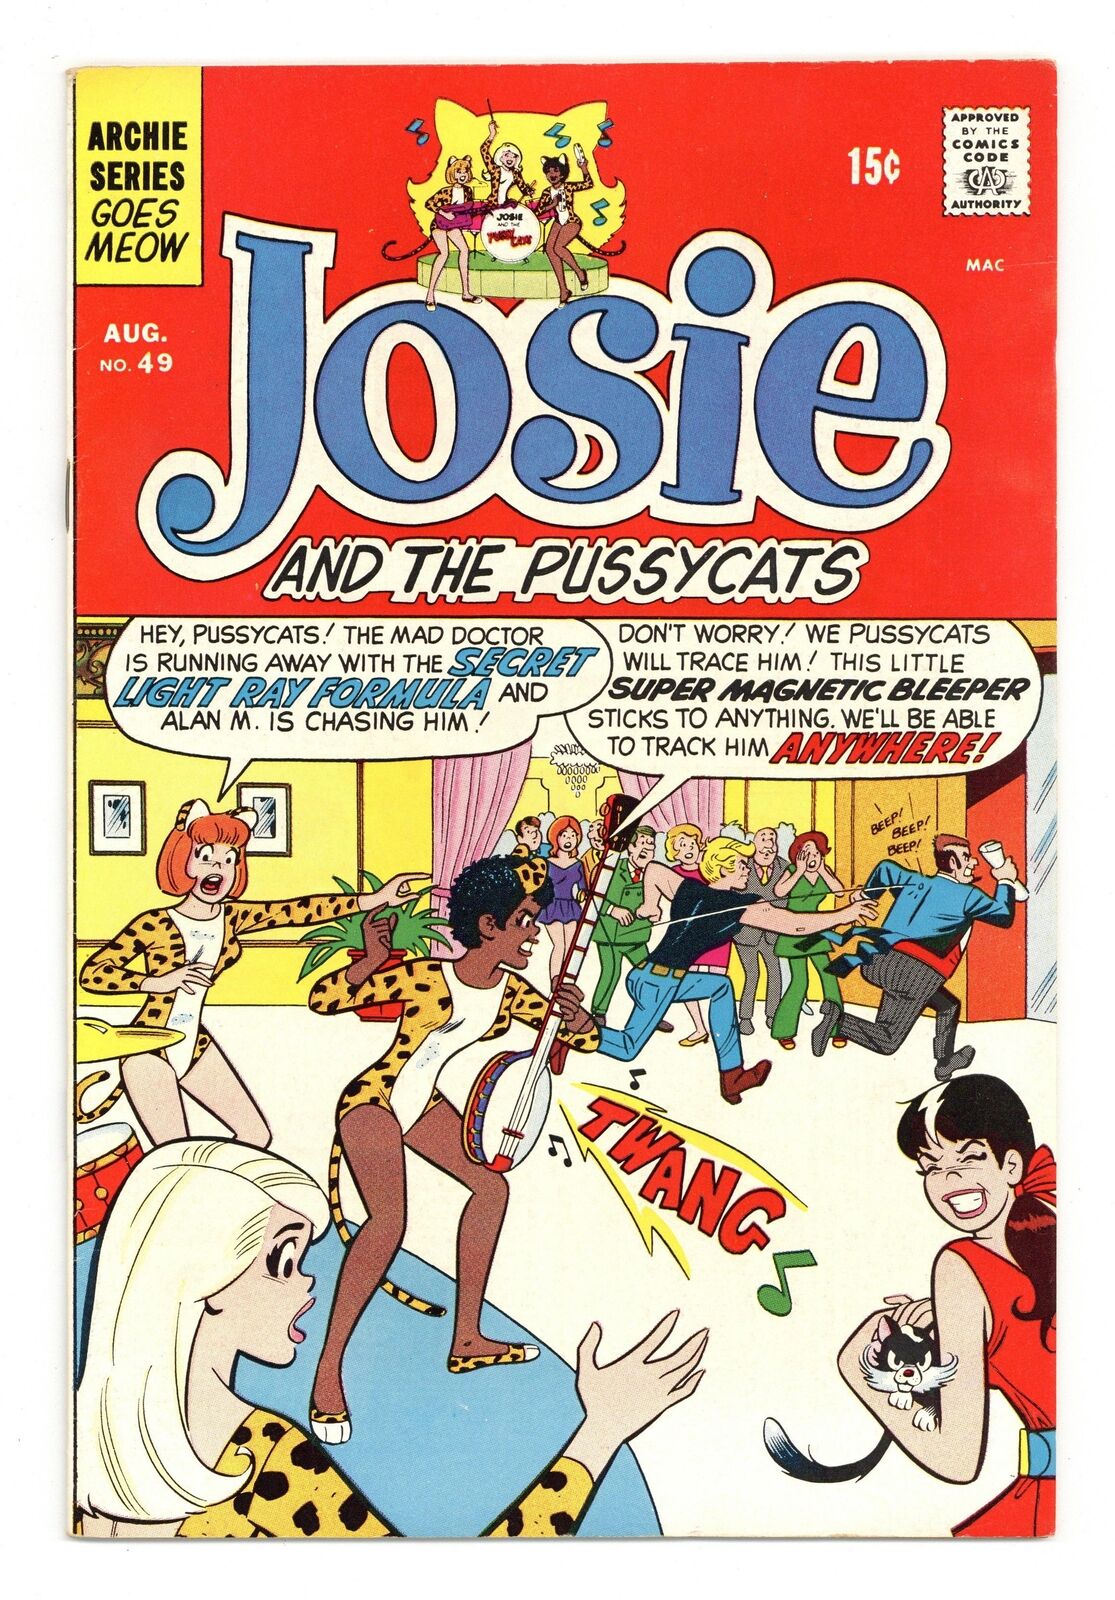 Josie and the Pussycats #49 FN+ 6.5 1970